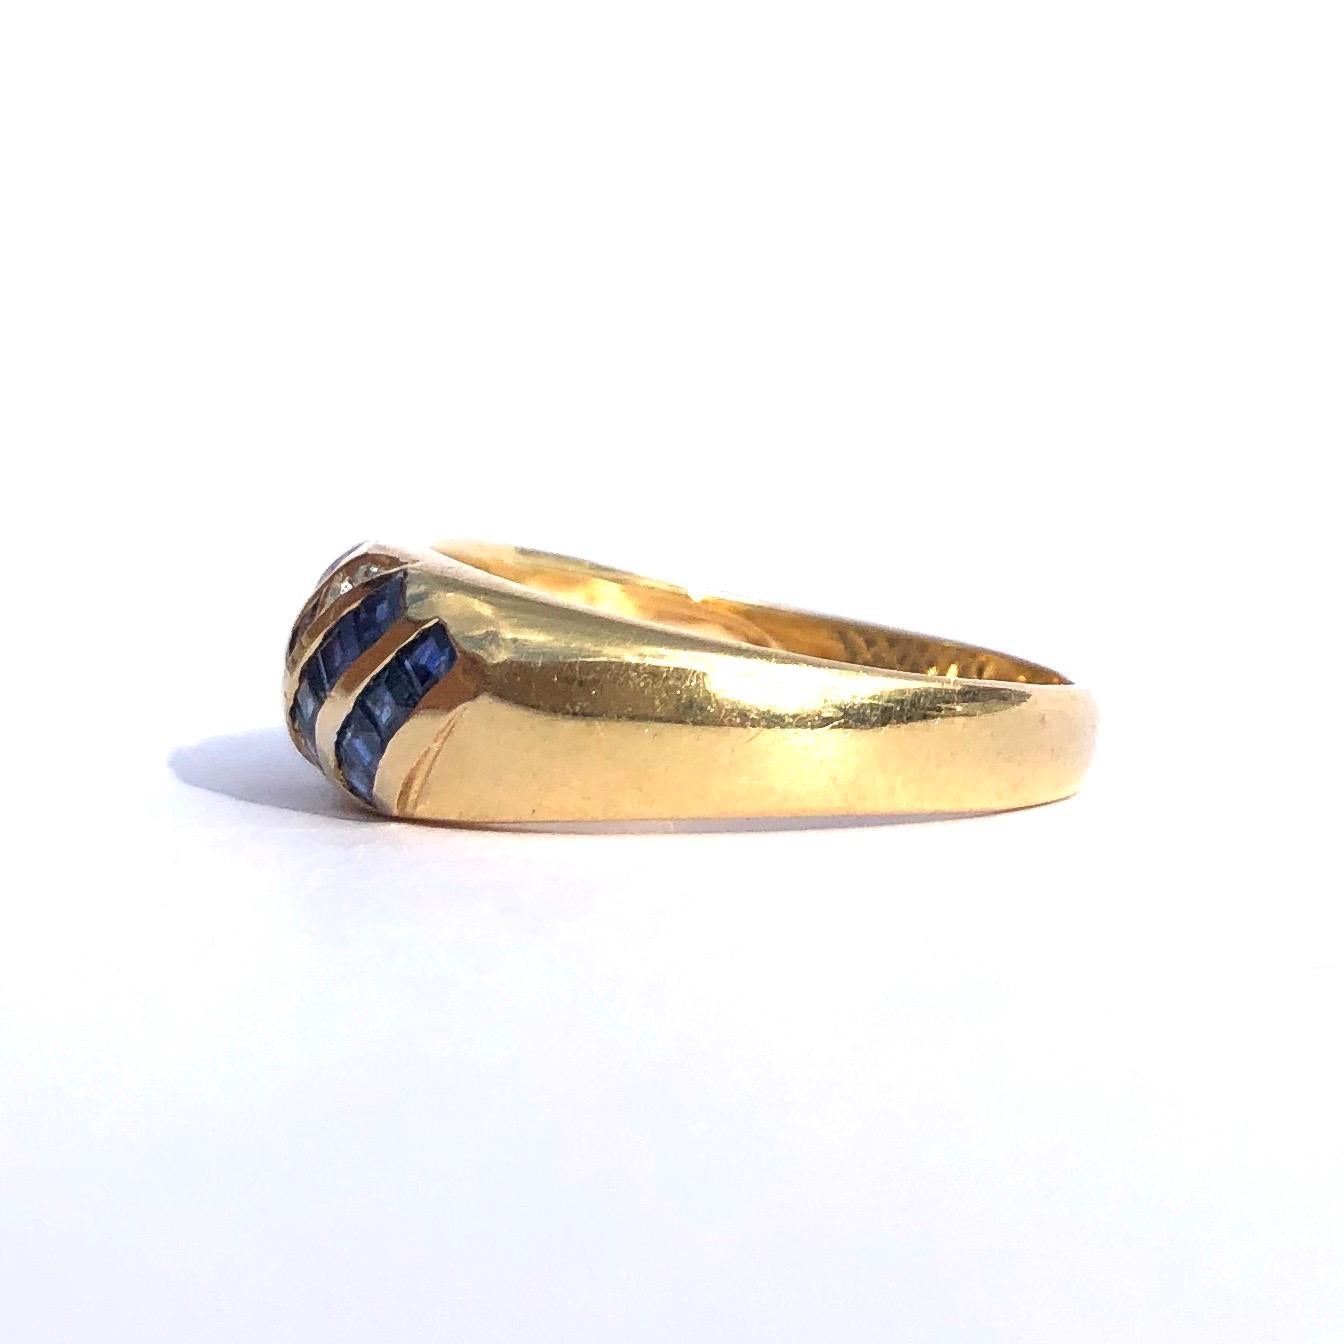 This 18ct gold band is encrusted with square cut sapphires and four round cut  diamond points. The 5pt sapphires make up six neat lines and have a wonderful glitter as it moves in the light. Made in London, England. 

Ring Size: M or 6 1/4
Band